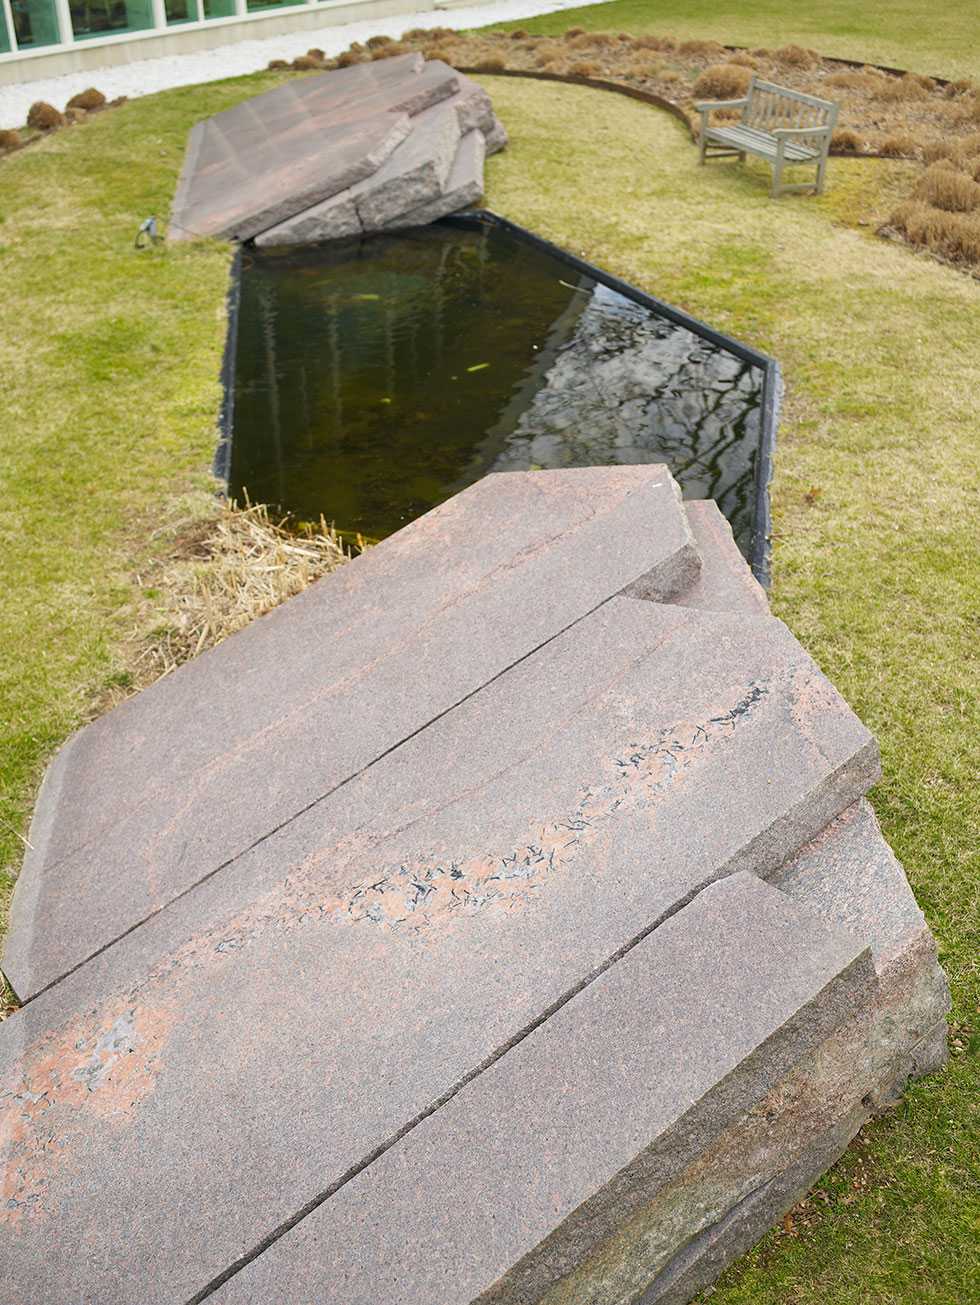 A black hexagonal pond in a patch of grass with large slated stones, a bench and shrubbery on a grassy area.